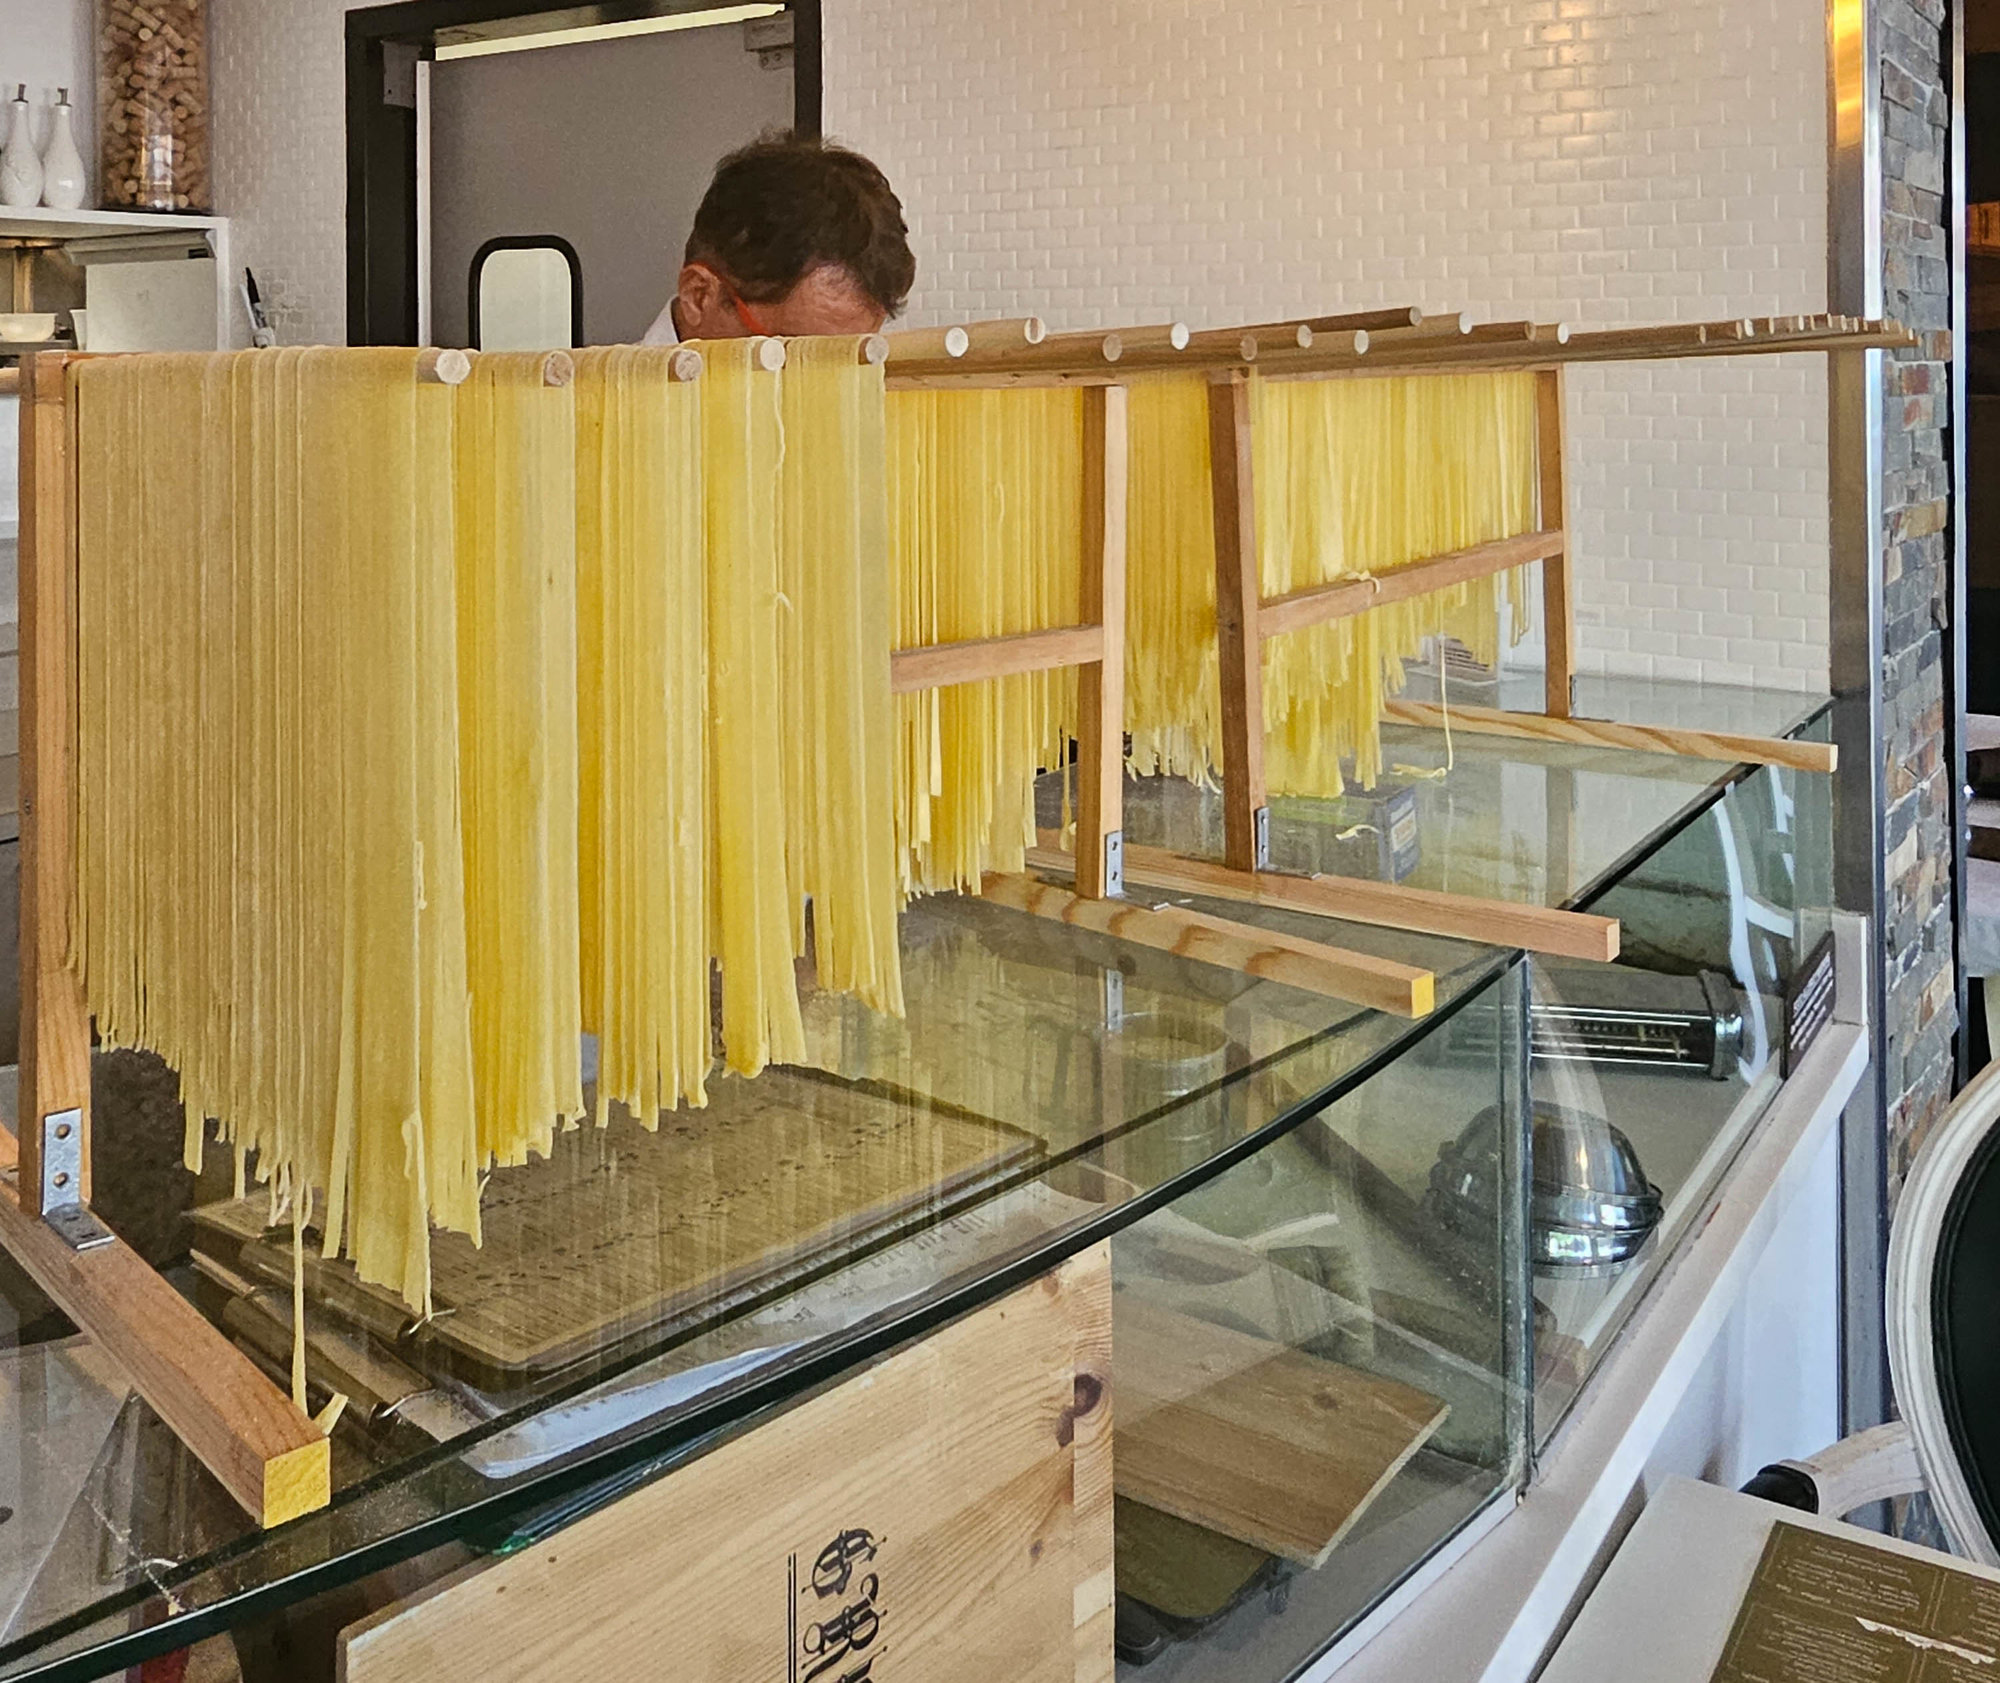 homemade pasta hanging out to dry